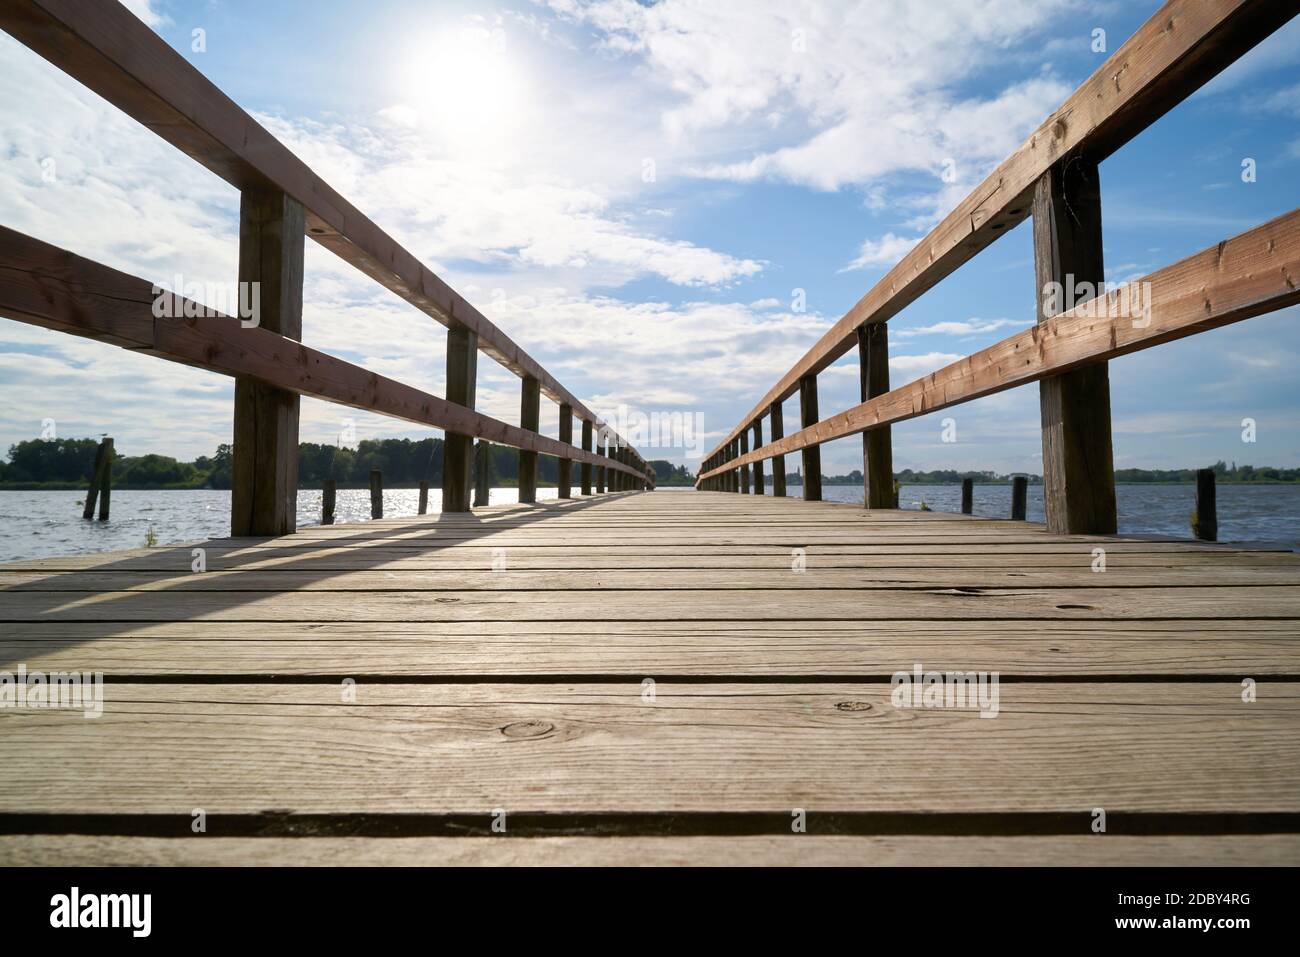 Boat landing stage on the banks of the river Havel near TÃ¶plitz in Germany Stock Photo